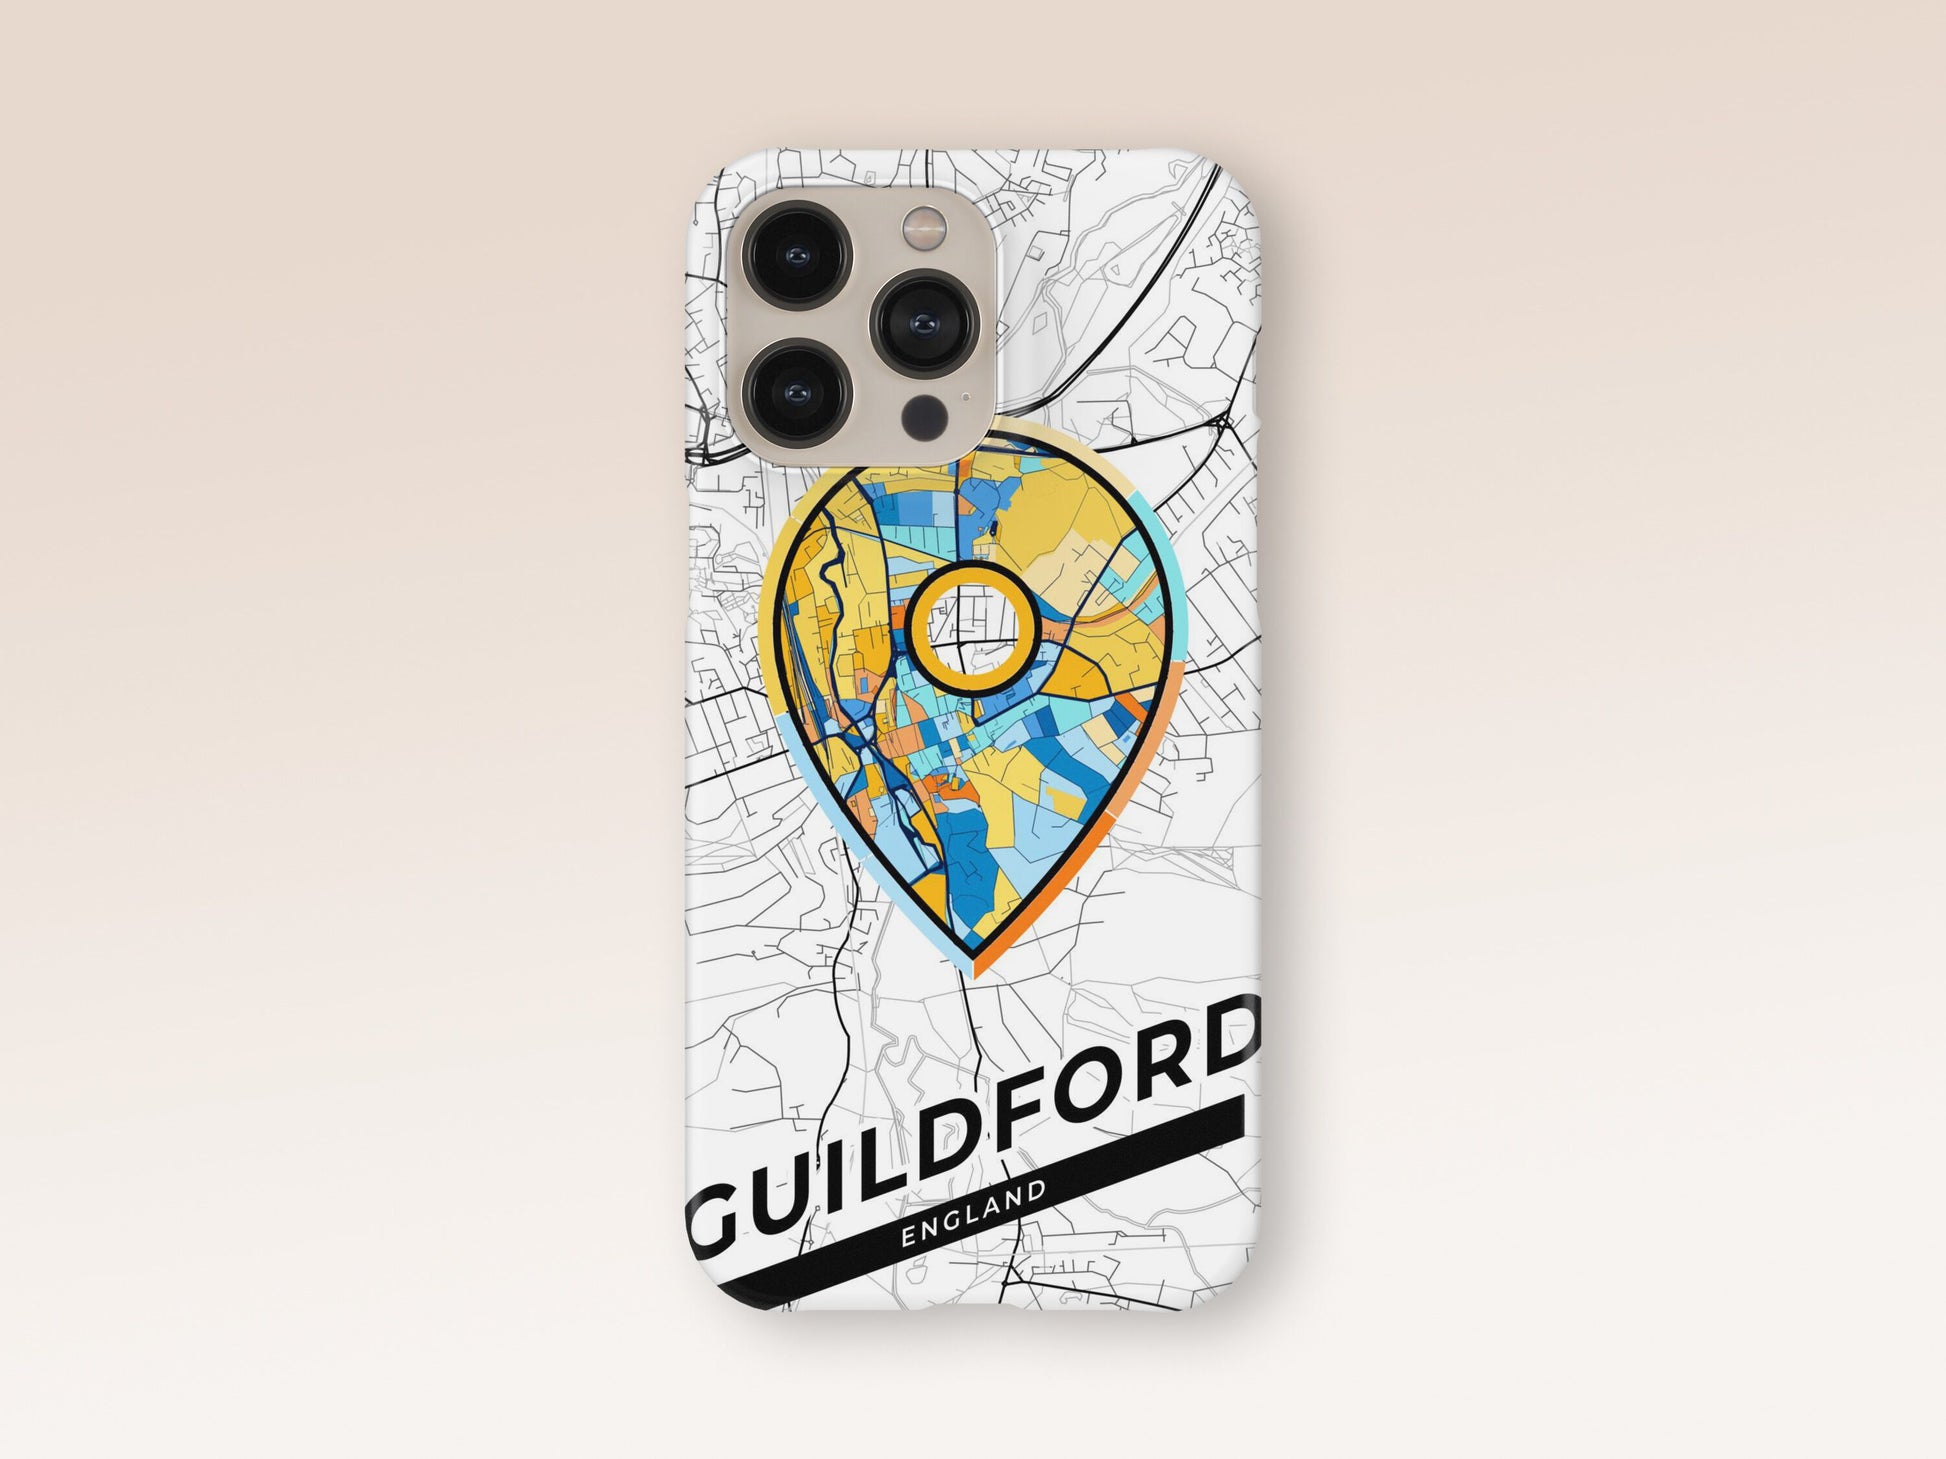 Guildford England slim phone case with colorful icon. Birthday, wedding or housewarming gift. Couple match cases. 1